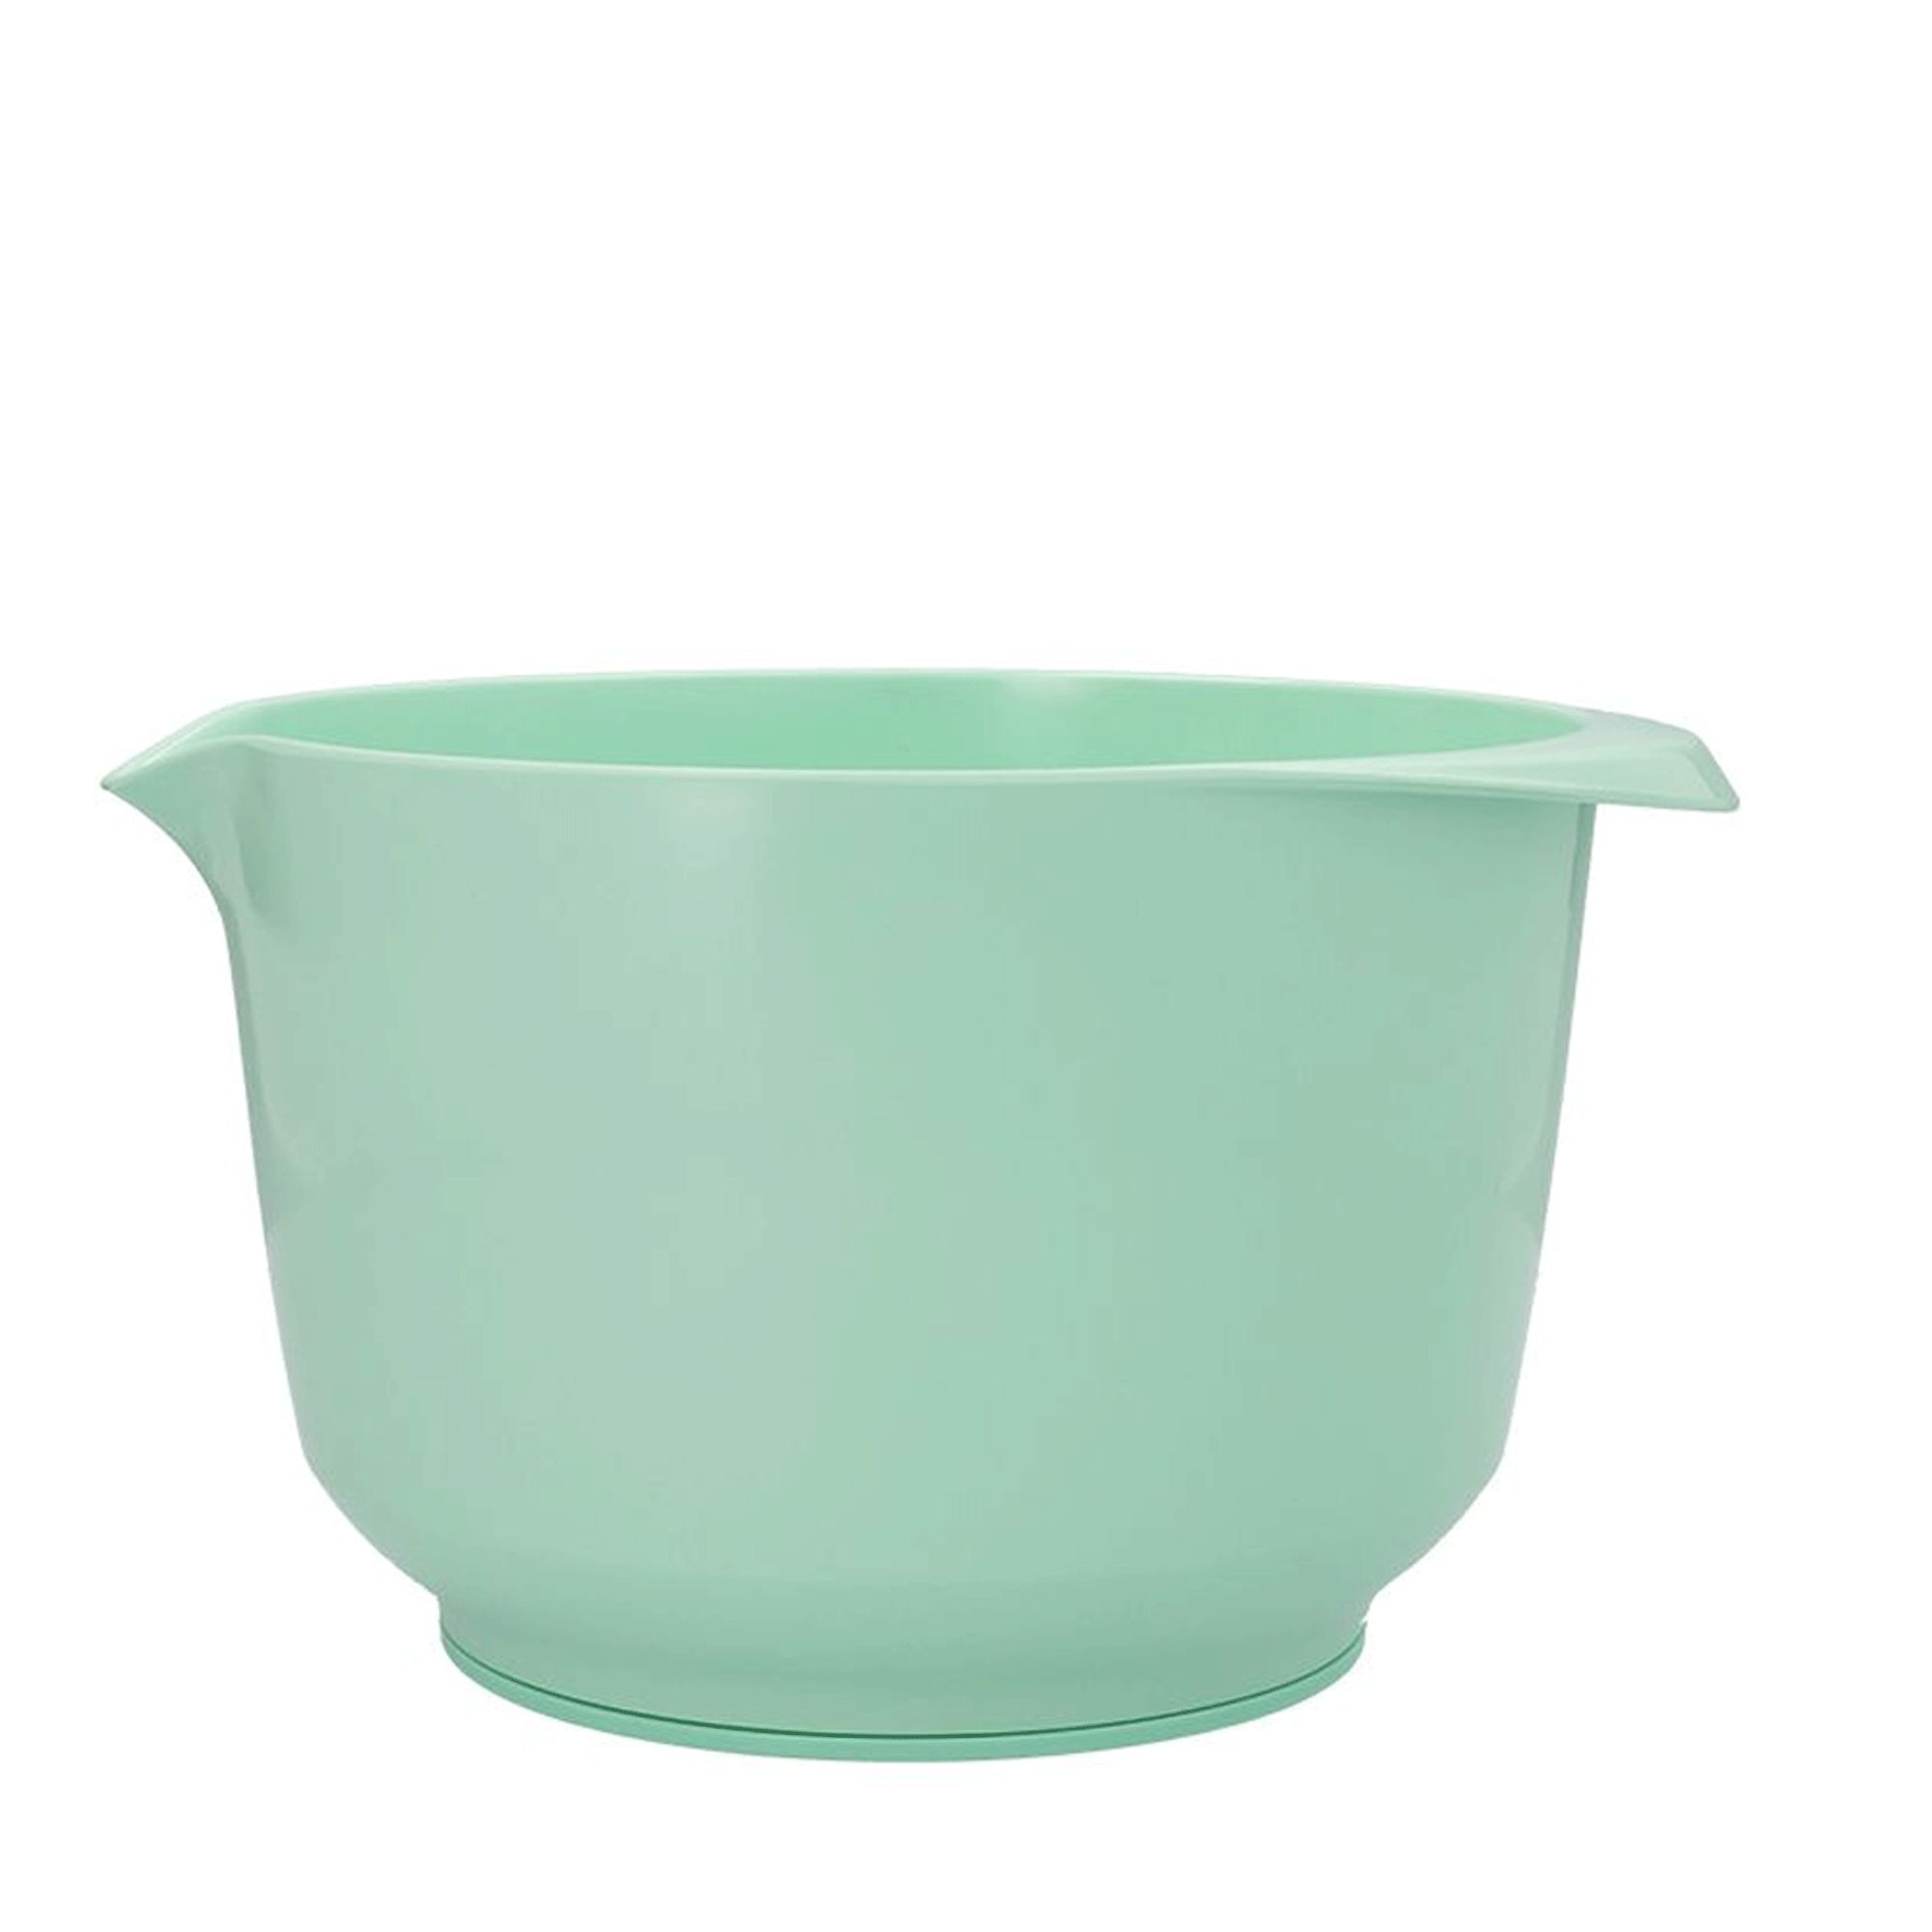 RBV Birkmann - mixing and serving bowl 4l - turquoise